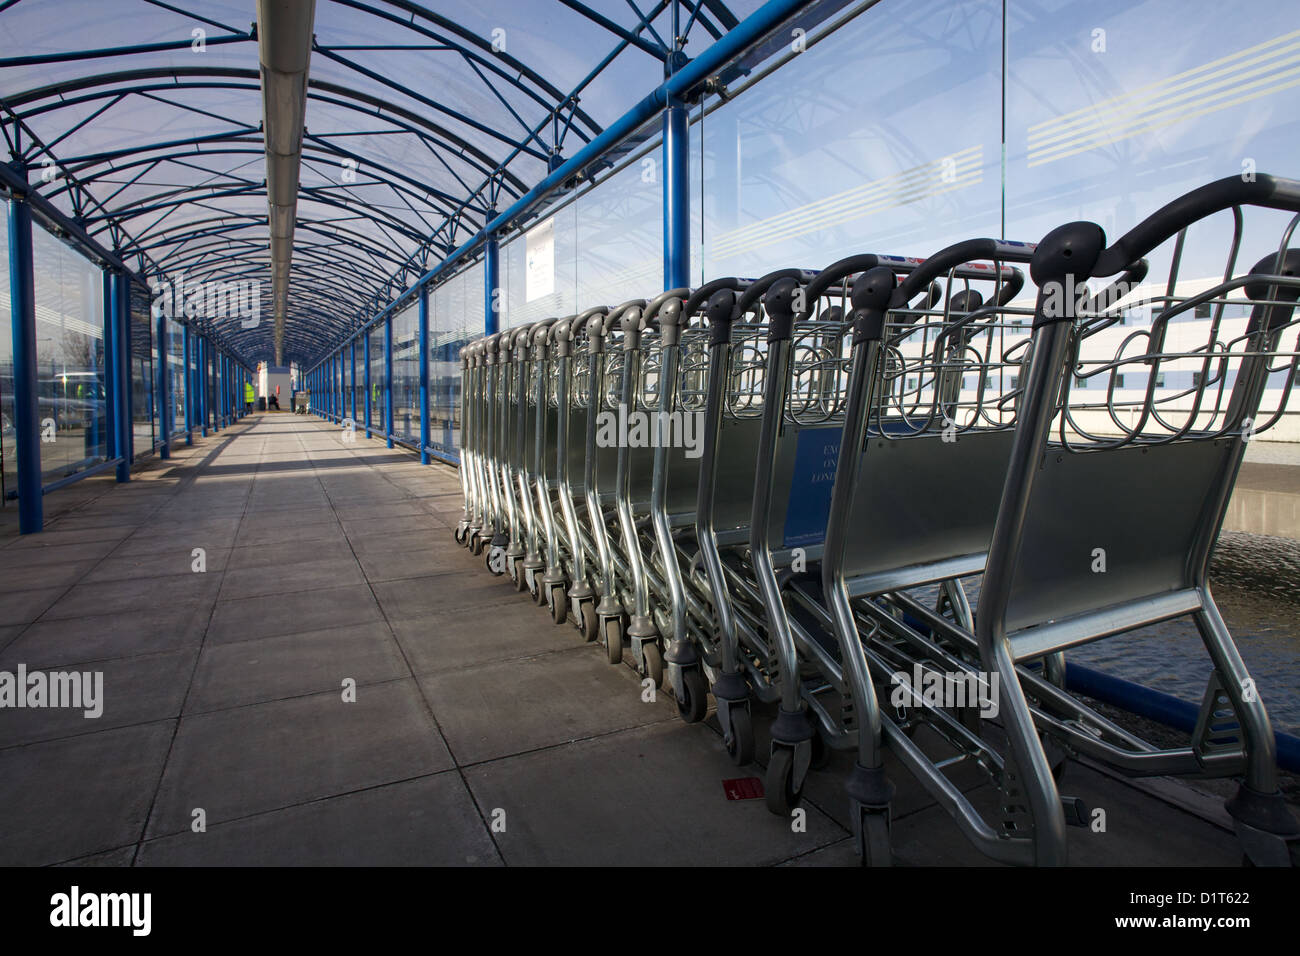 Row of luggage trolleys at London City Airport Stock Photo